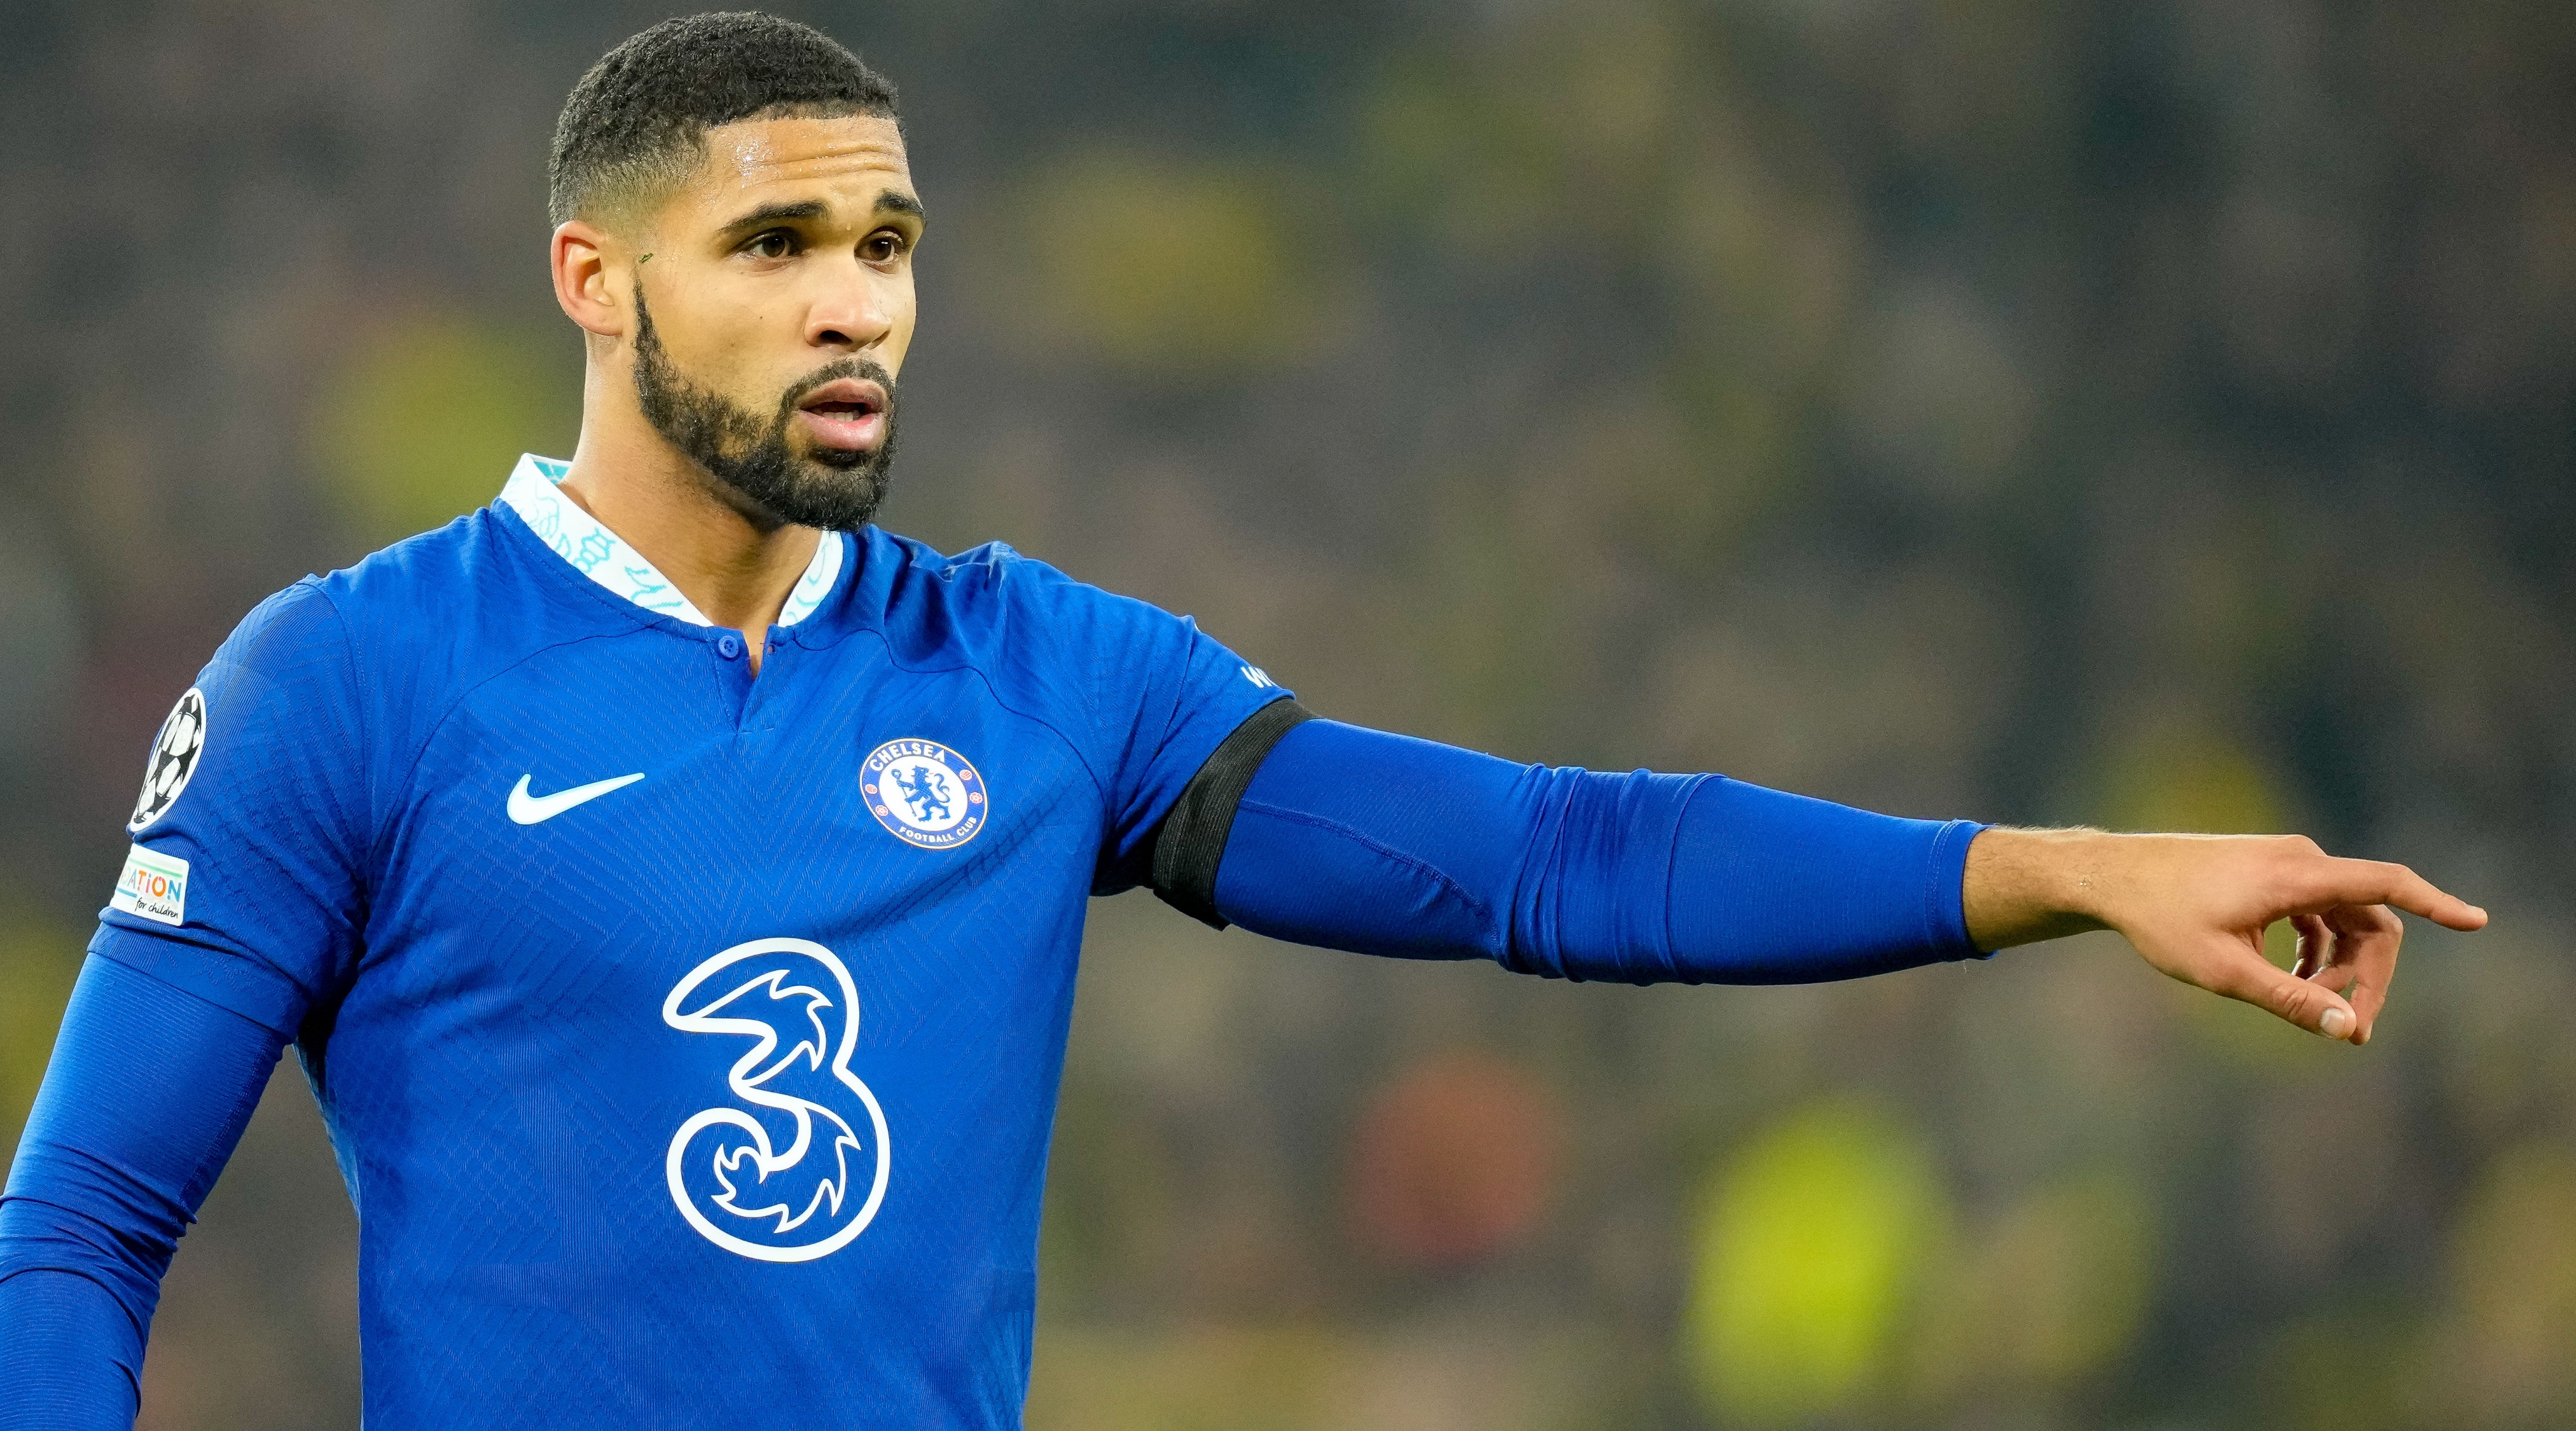 Ruben Loftus-Cheek of Chelsea points during the UEFA Champions League round of 16 first leg match between Borussia Dortmund and Chelsea at Signal Iduna Park on 15 February, 2023 in Dortmund, Germany.